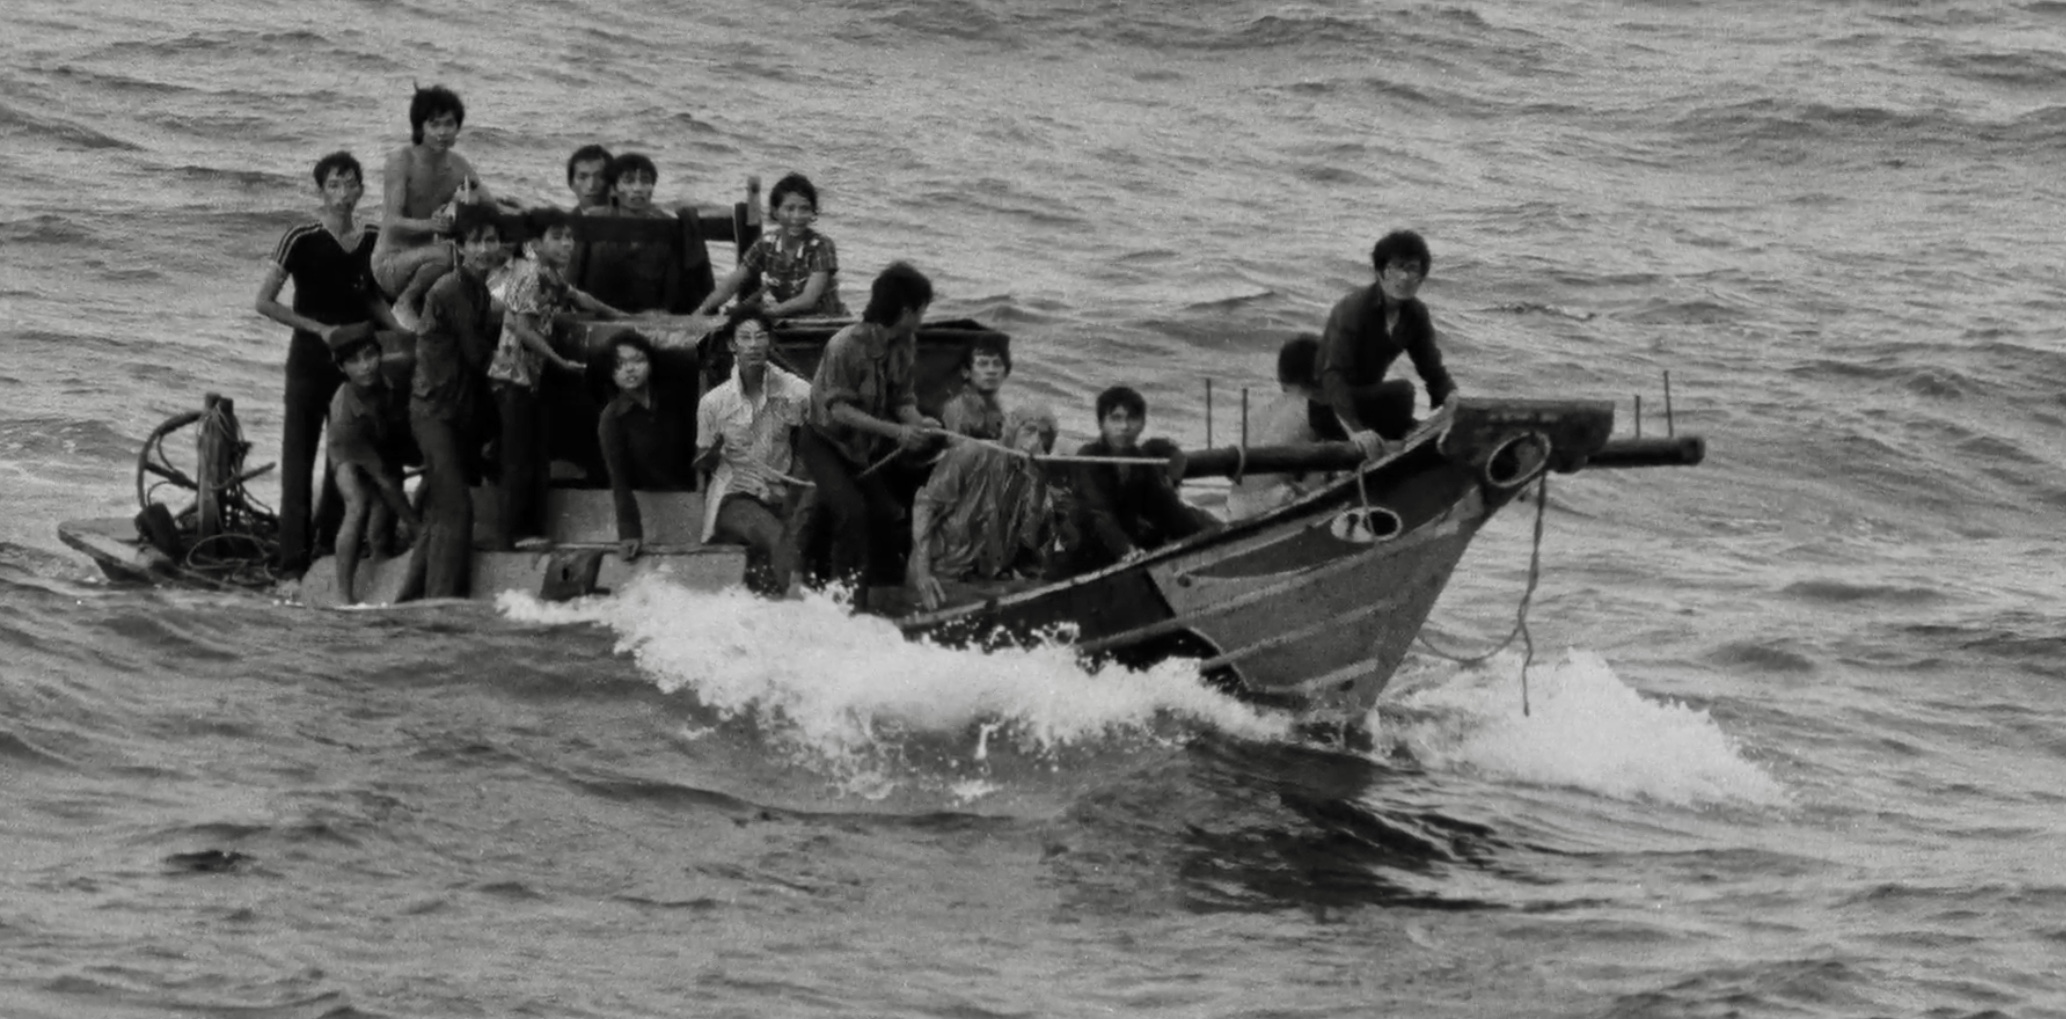 A black and white photograph of a group of refugees on a small boat in the water.